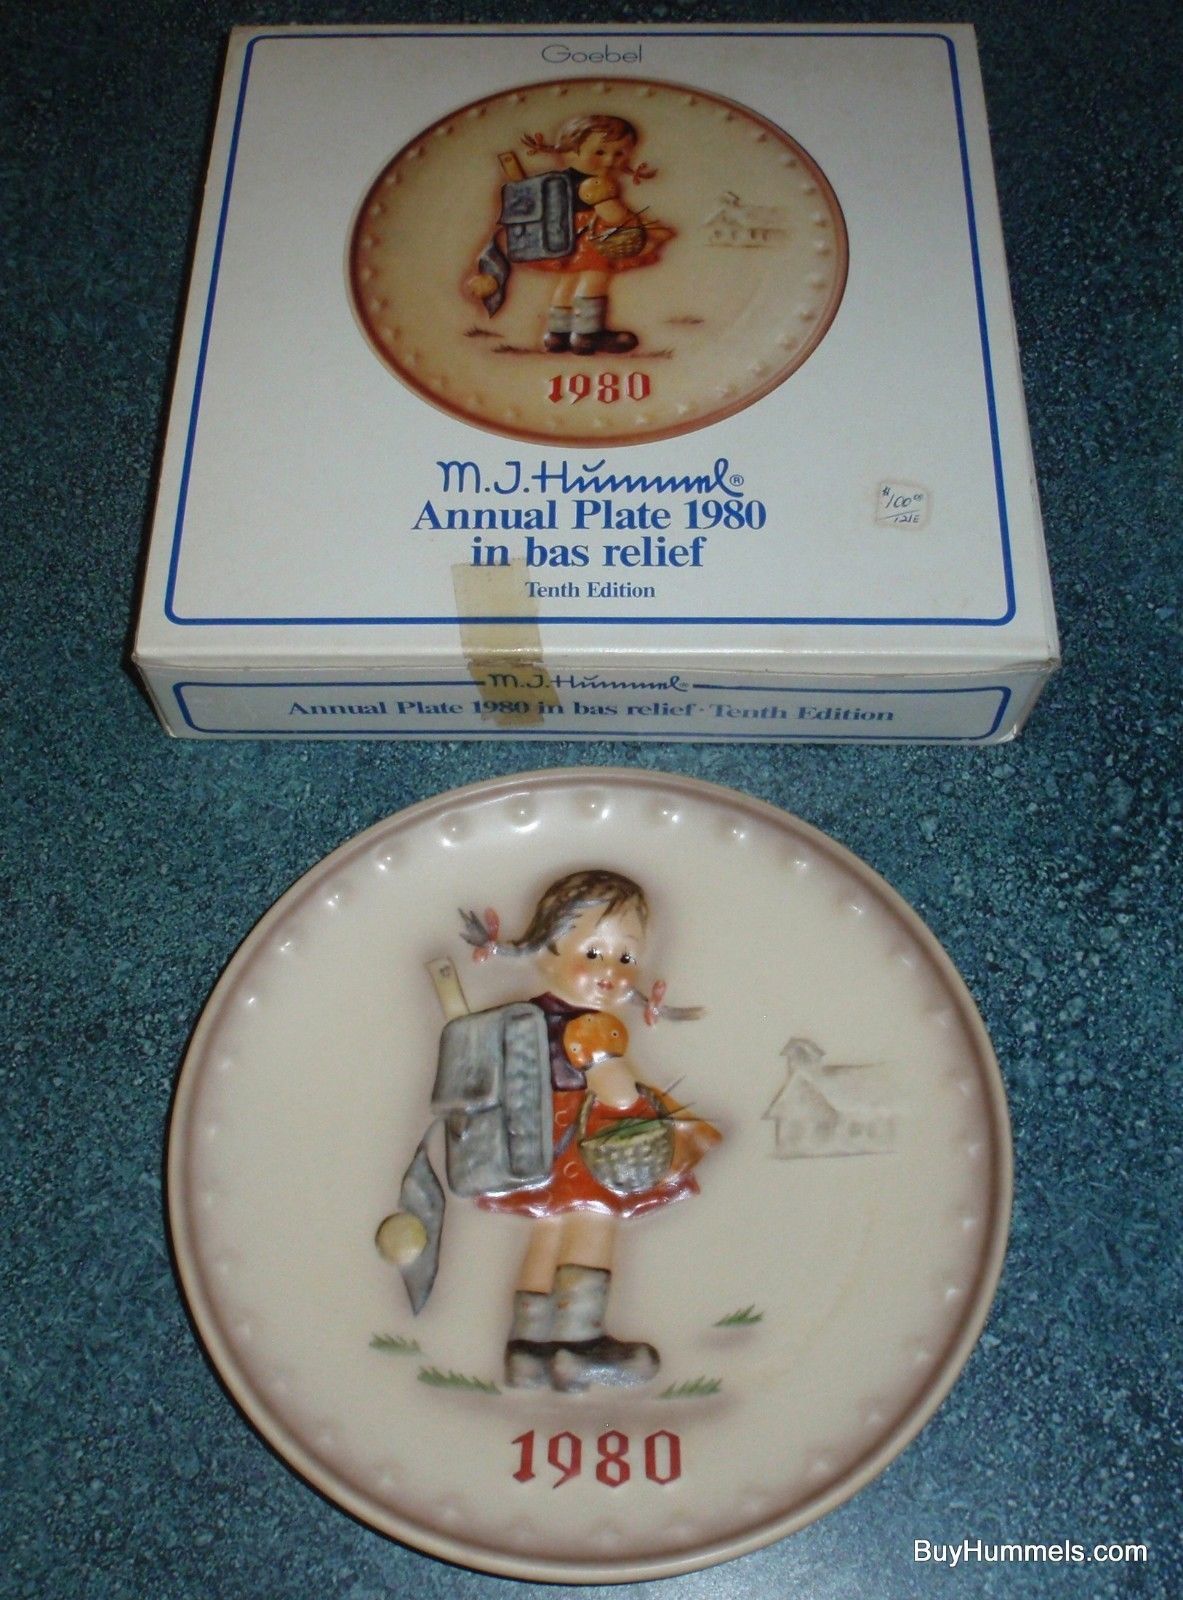 Goebel Hummel Annual Plate1980 in bas relief Tenth Edition Germany New In Box